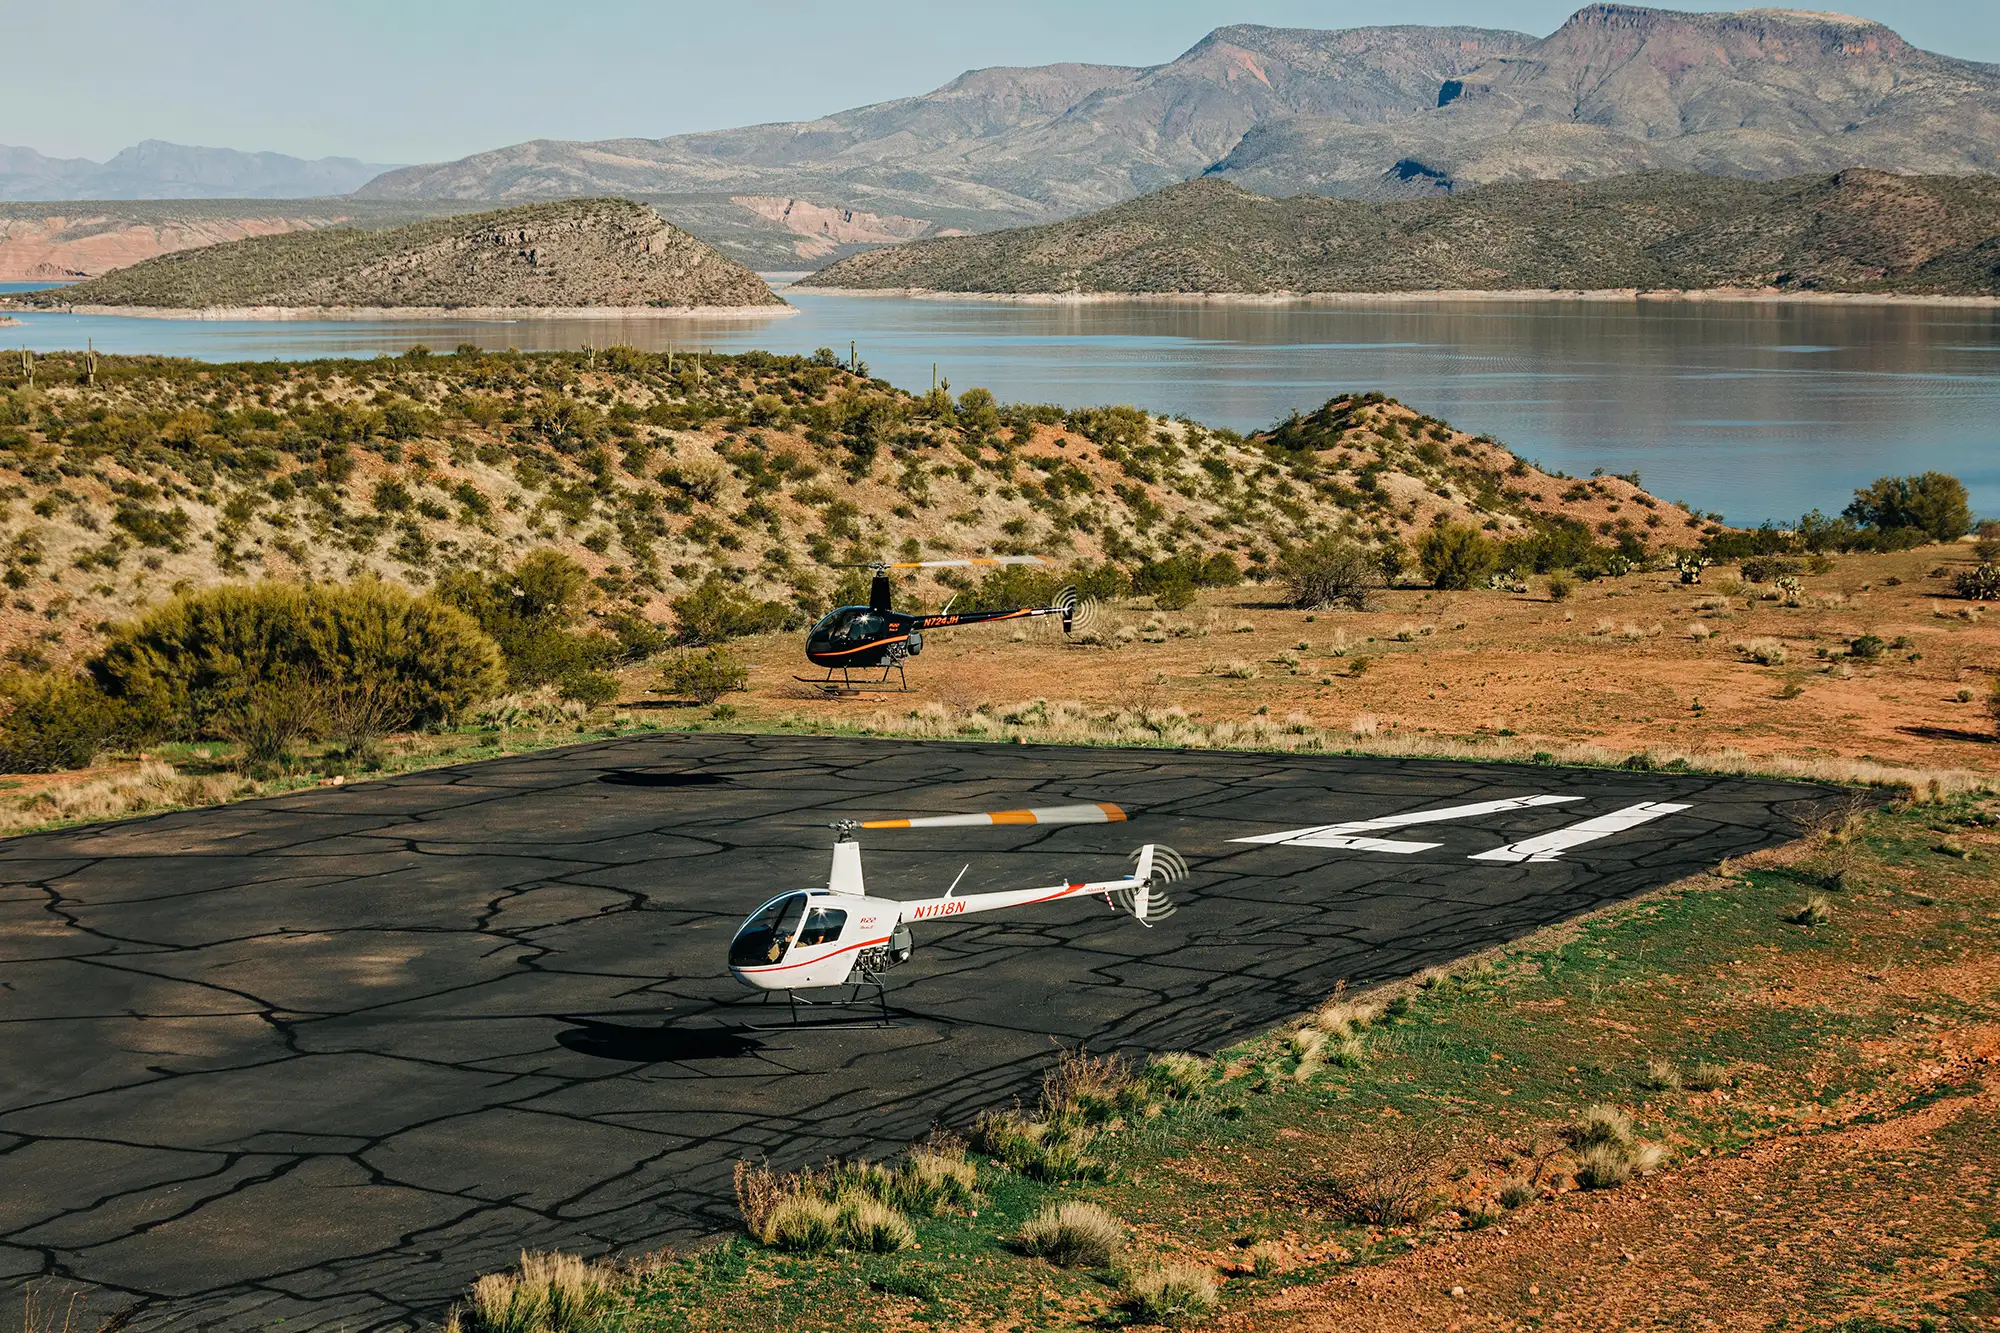 Aerial photography of helicopters taking off at air strip near lake in Arizona